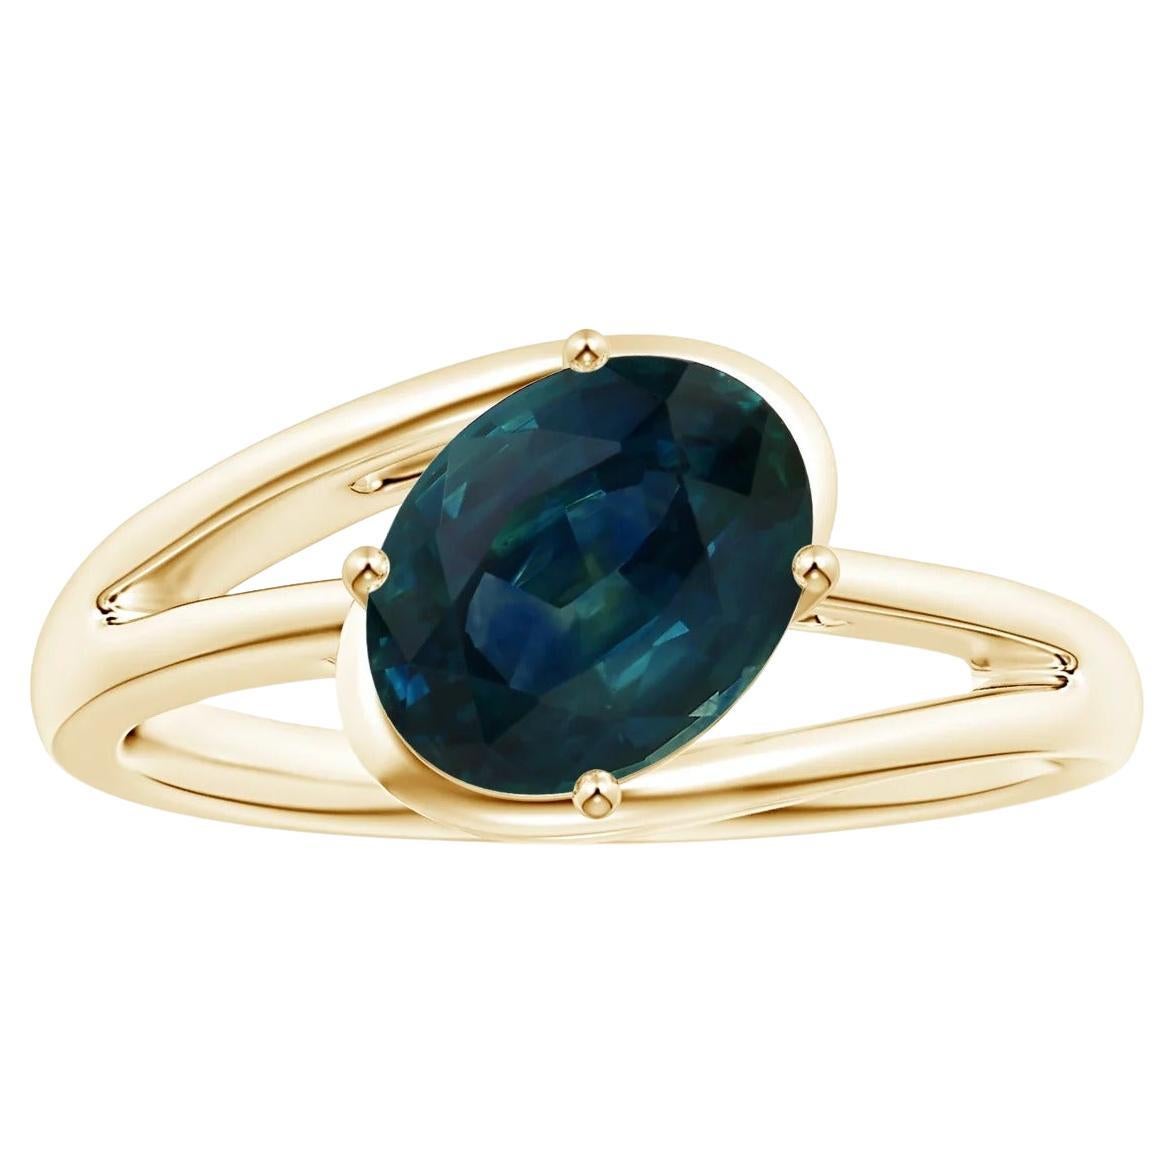 For Sale:  Angara Gia Certified Natural Solitaire Teal Sapphire Bypass Ring in Yellow Gold